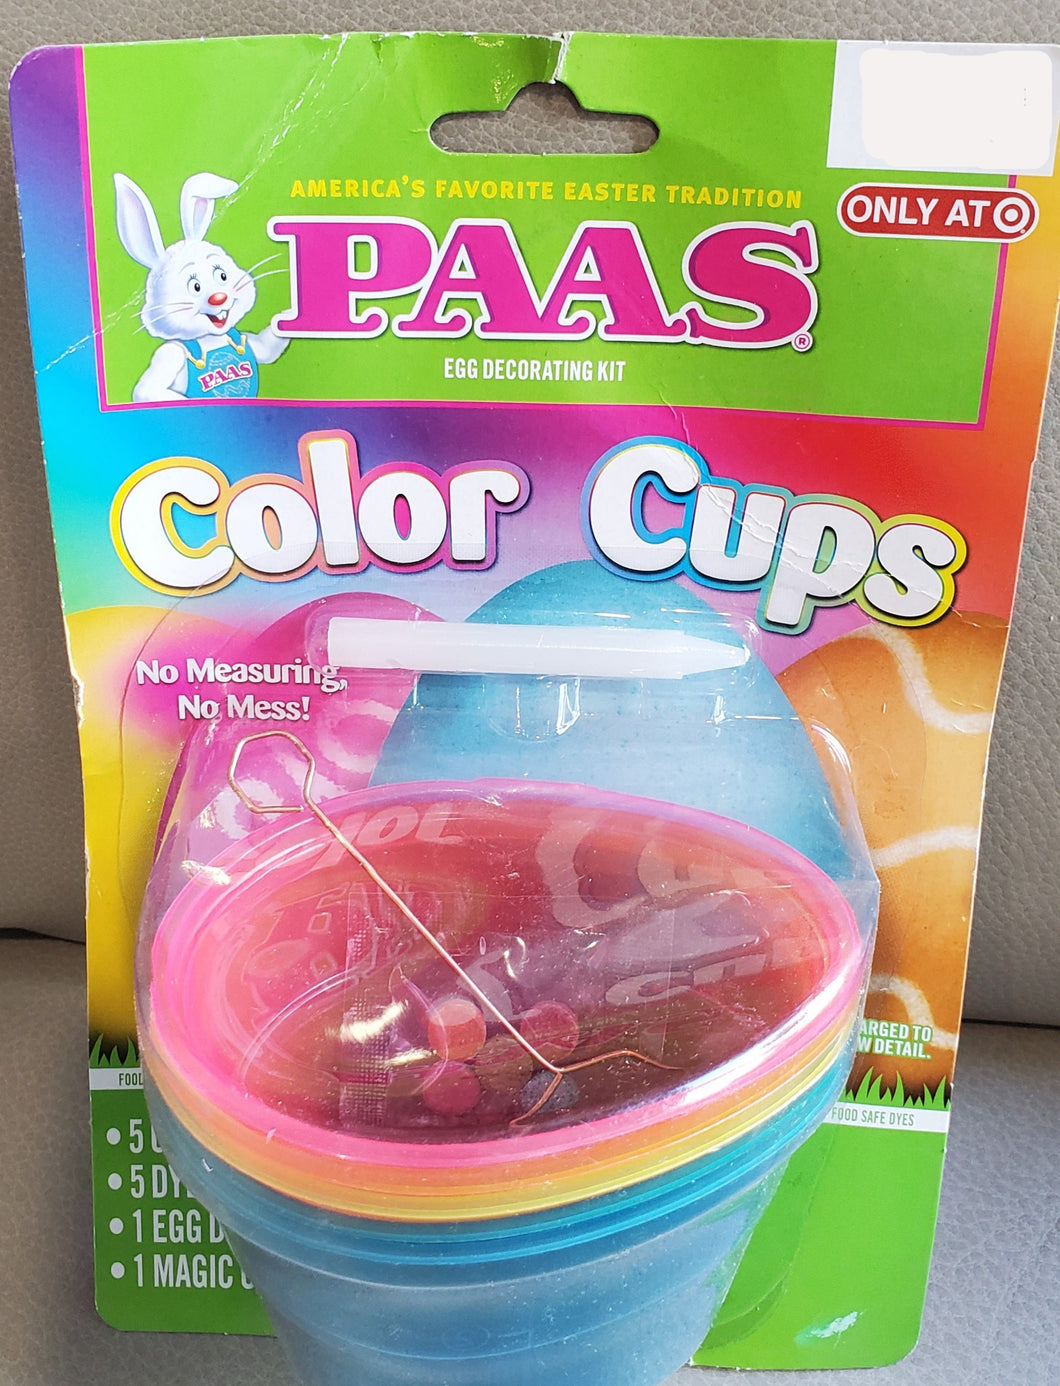 PAAS Egg Decorating Kit Color Cups, Easter, Egg Dye